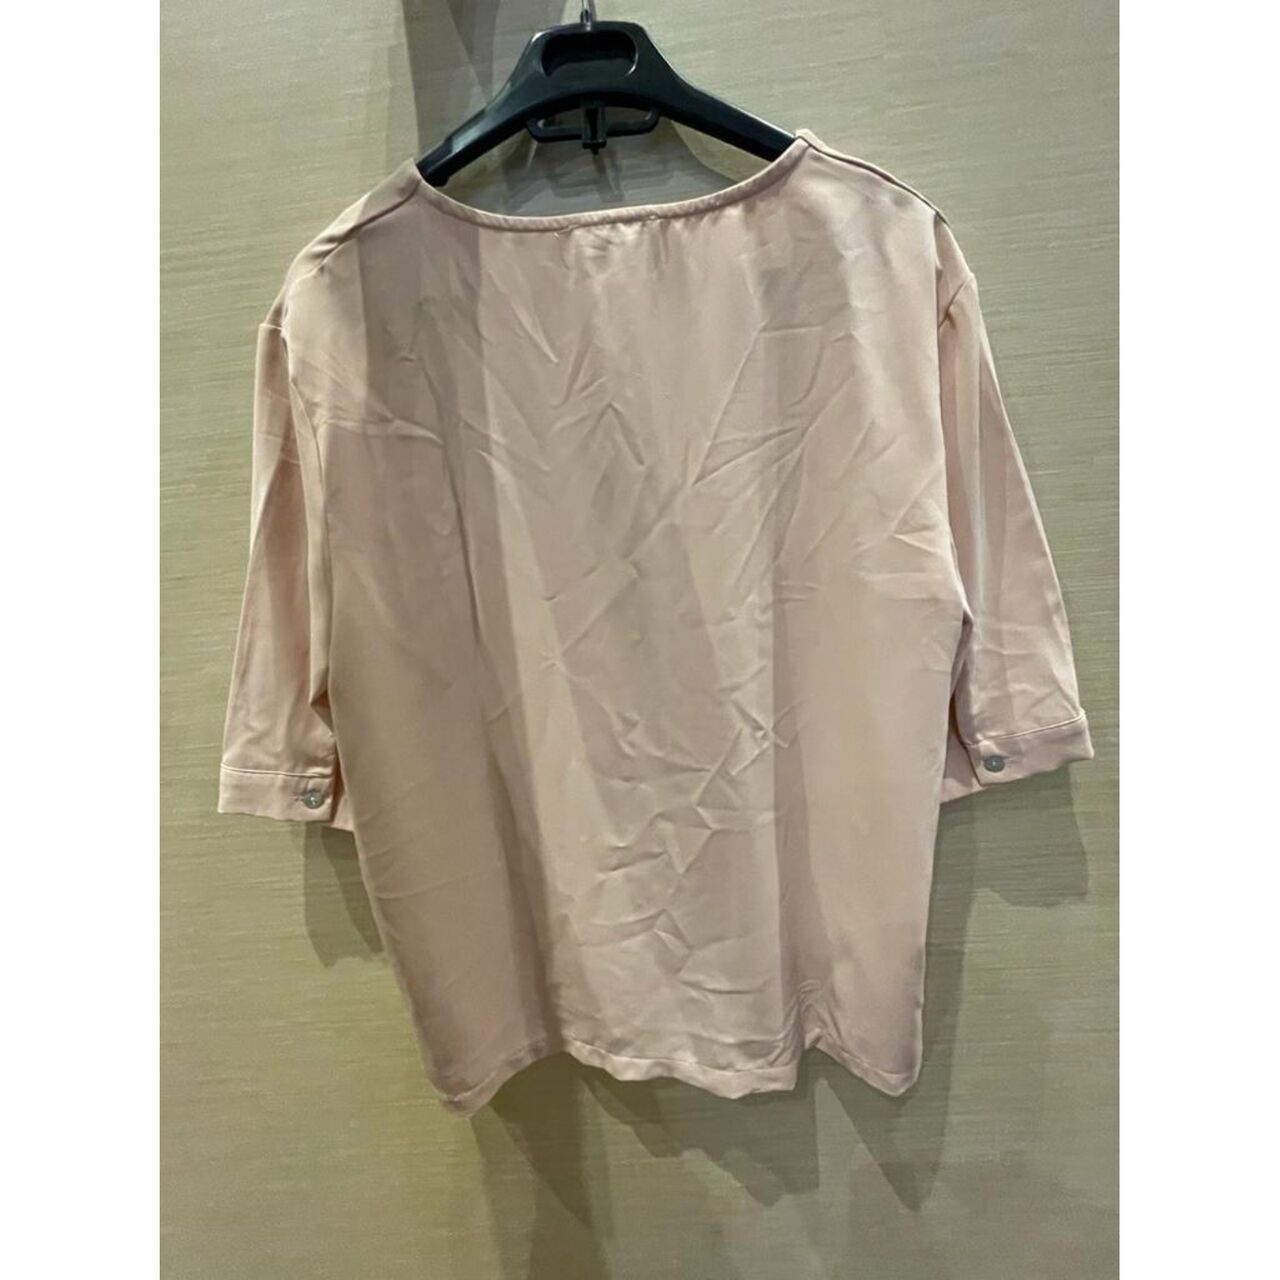 This is April Soft Pink Blouse